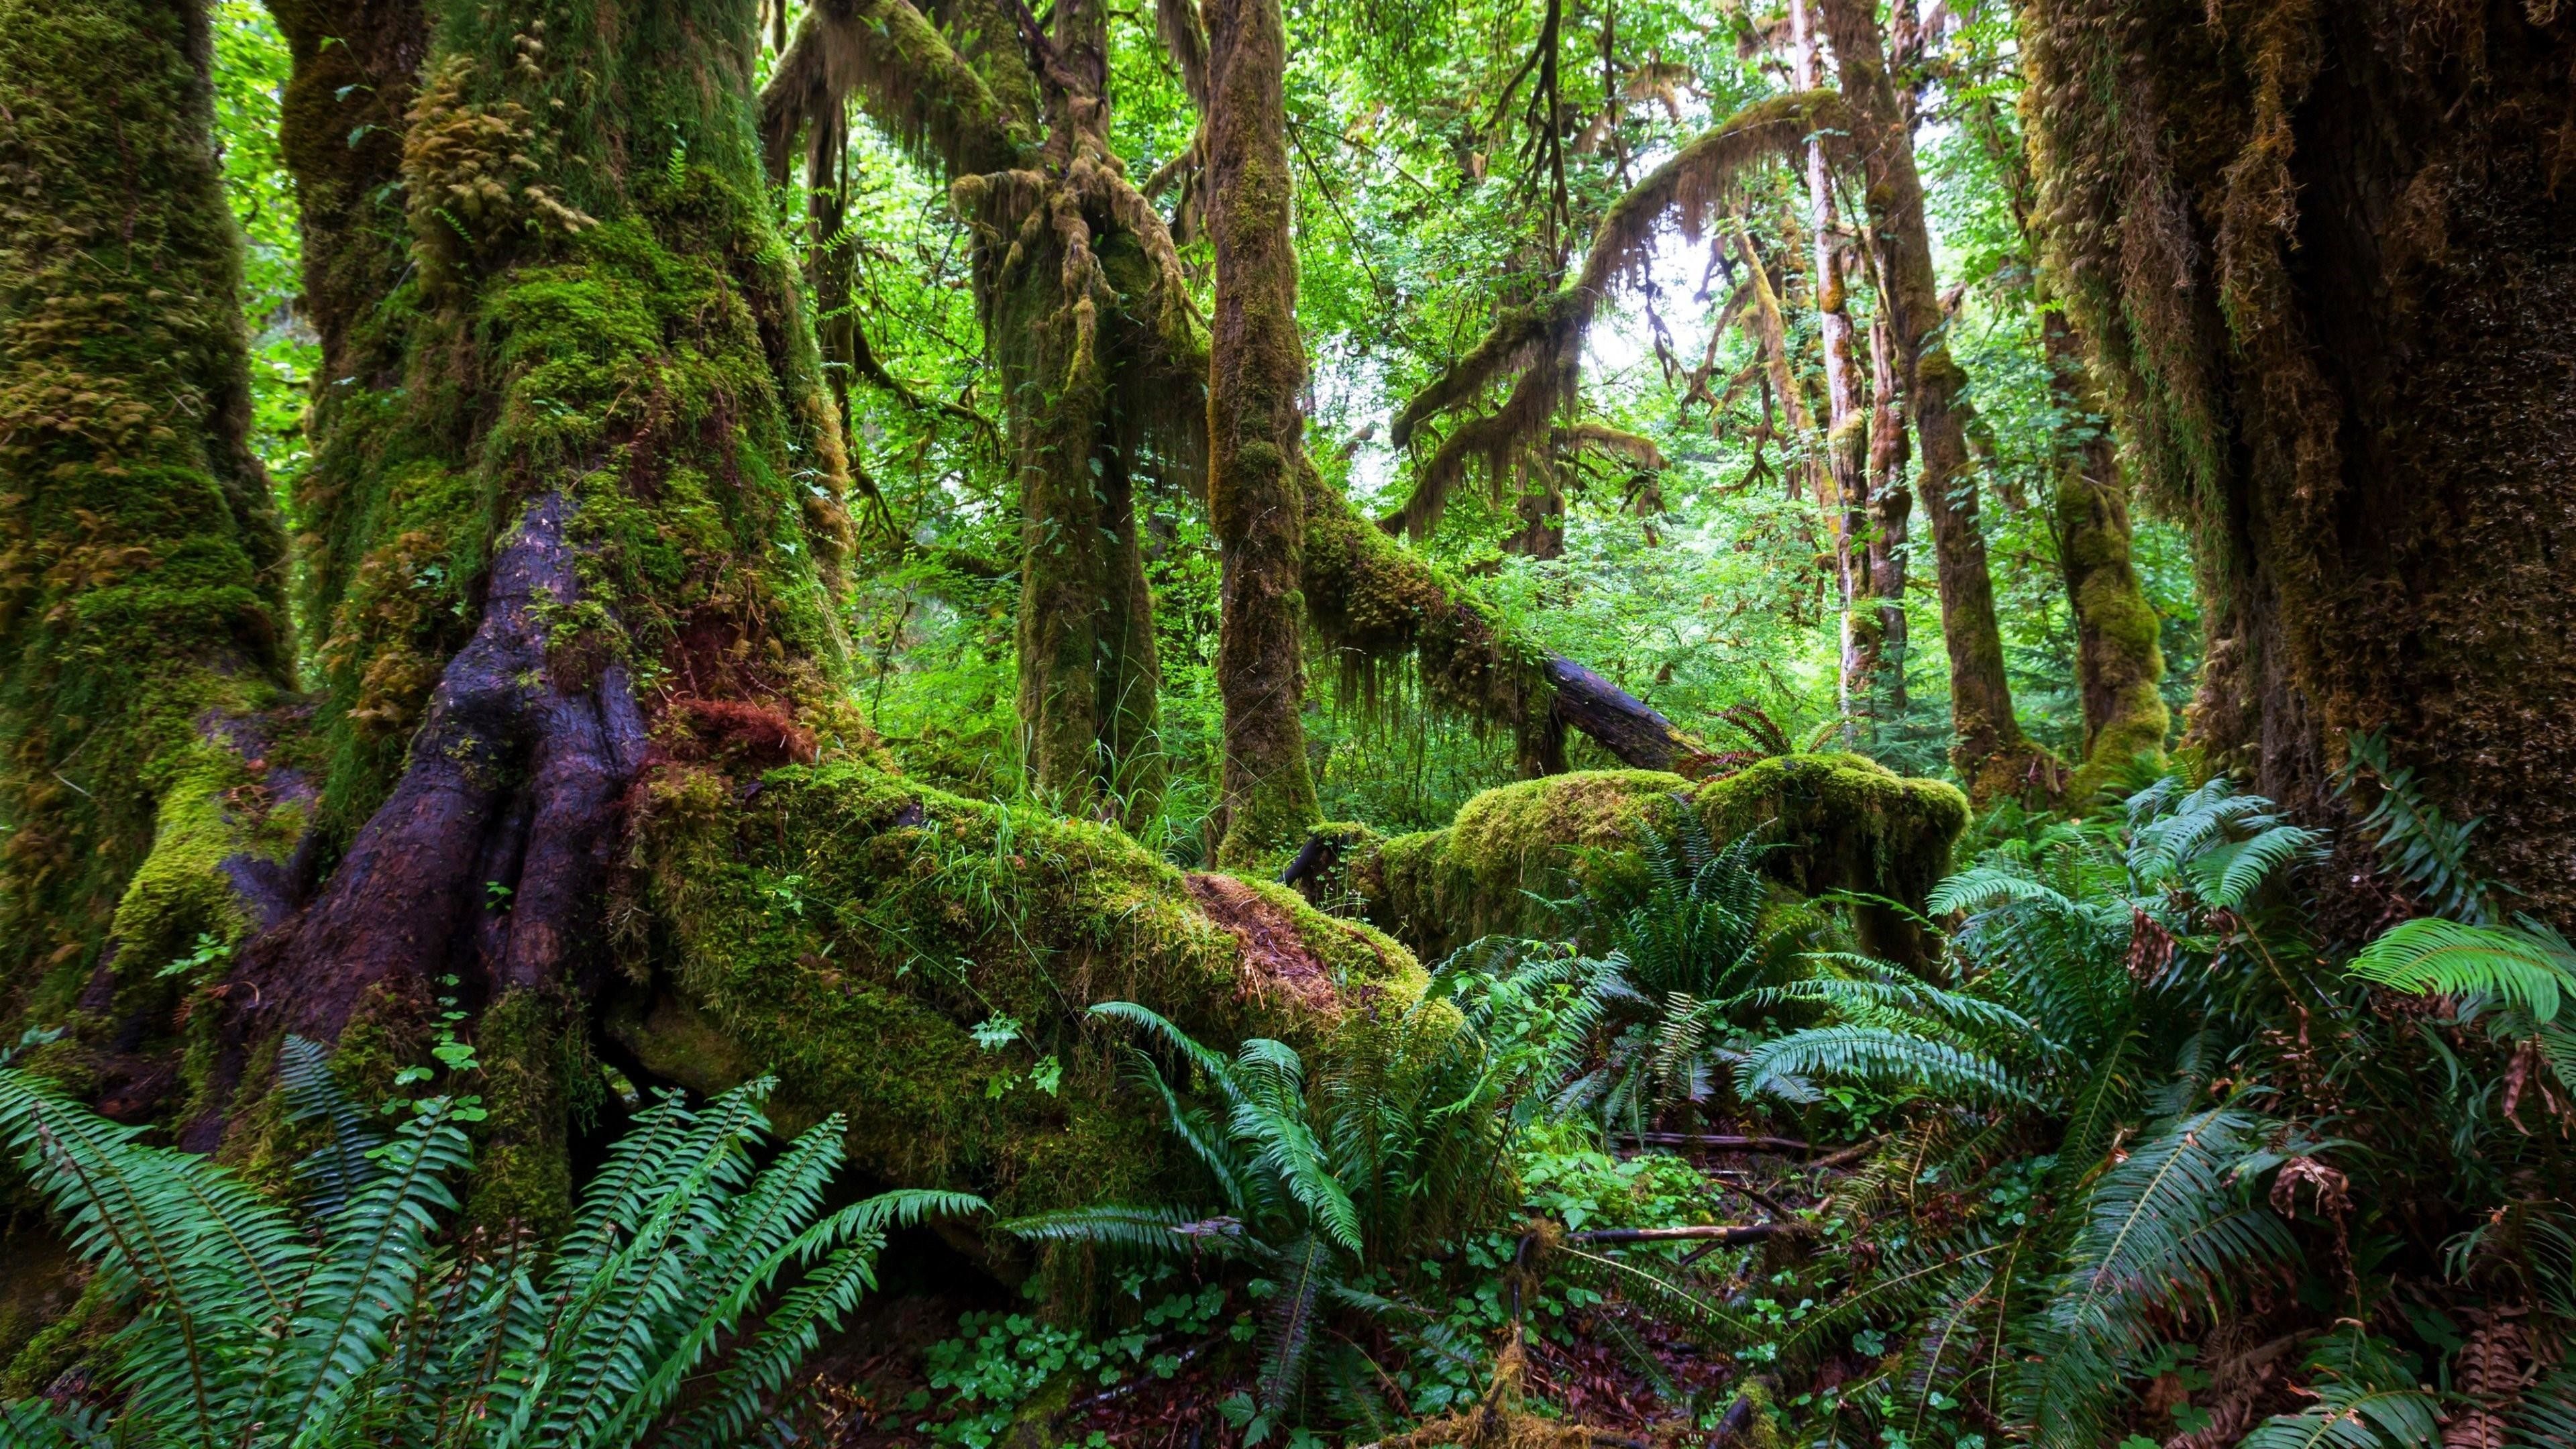 A mossy forest with ferns and trees. - Jungle